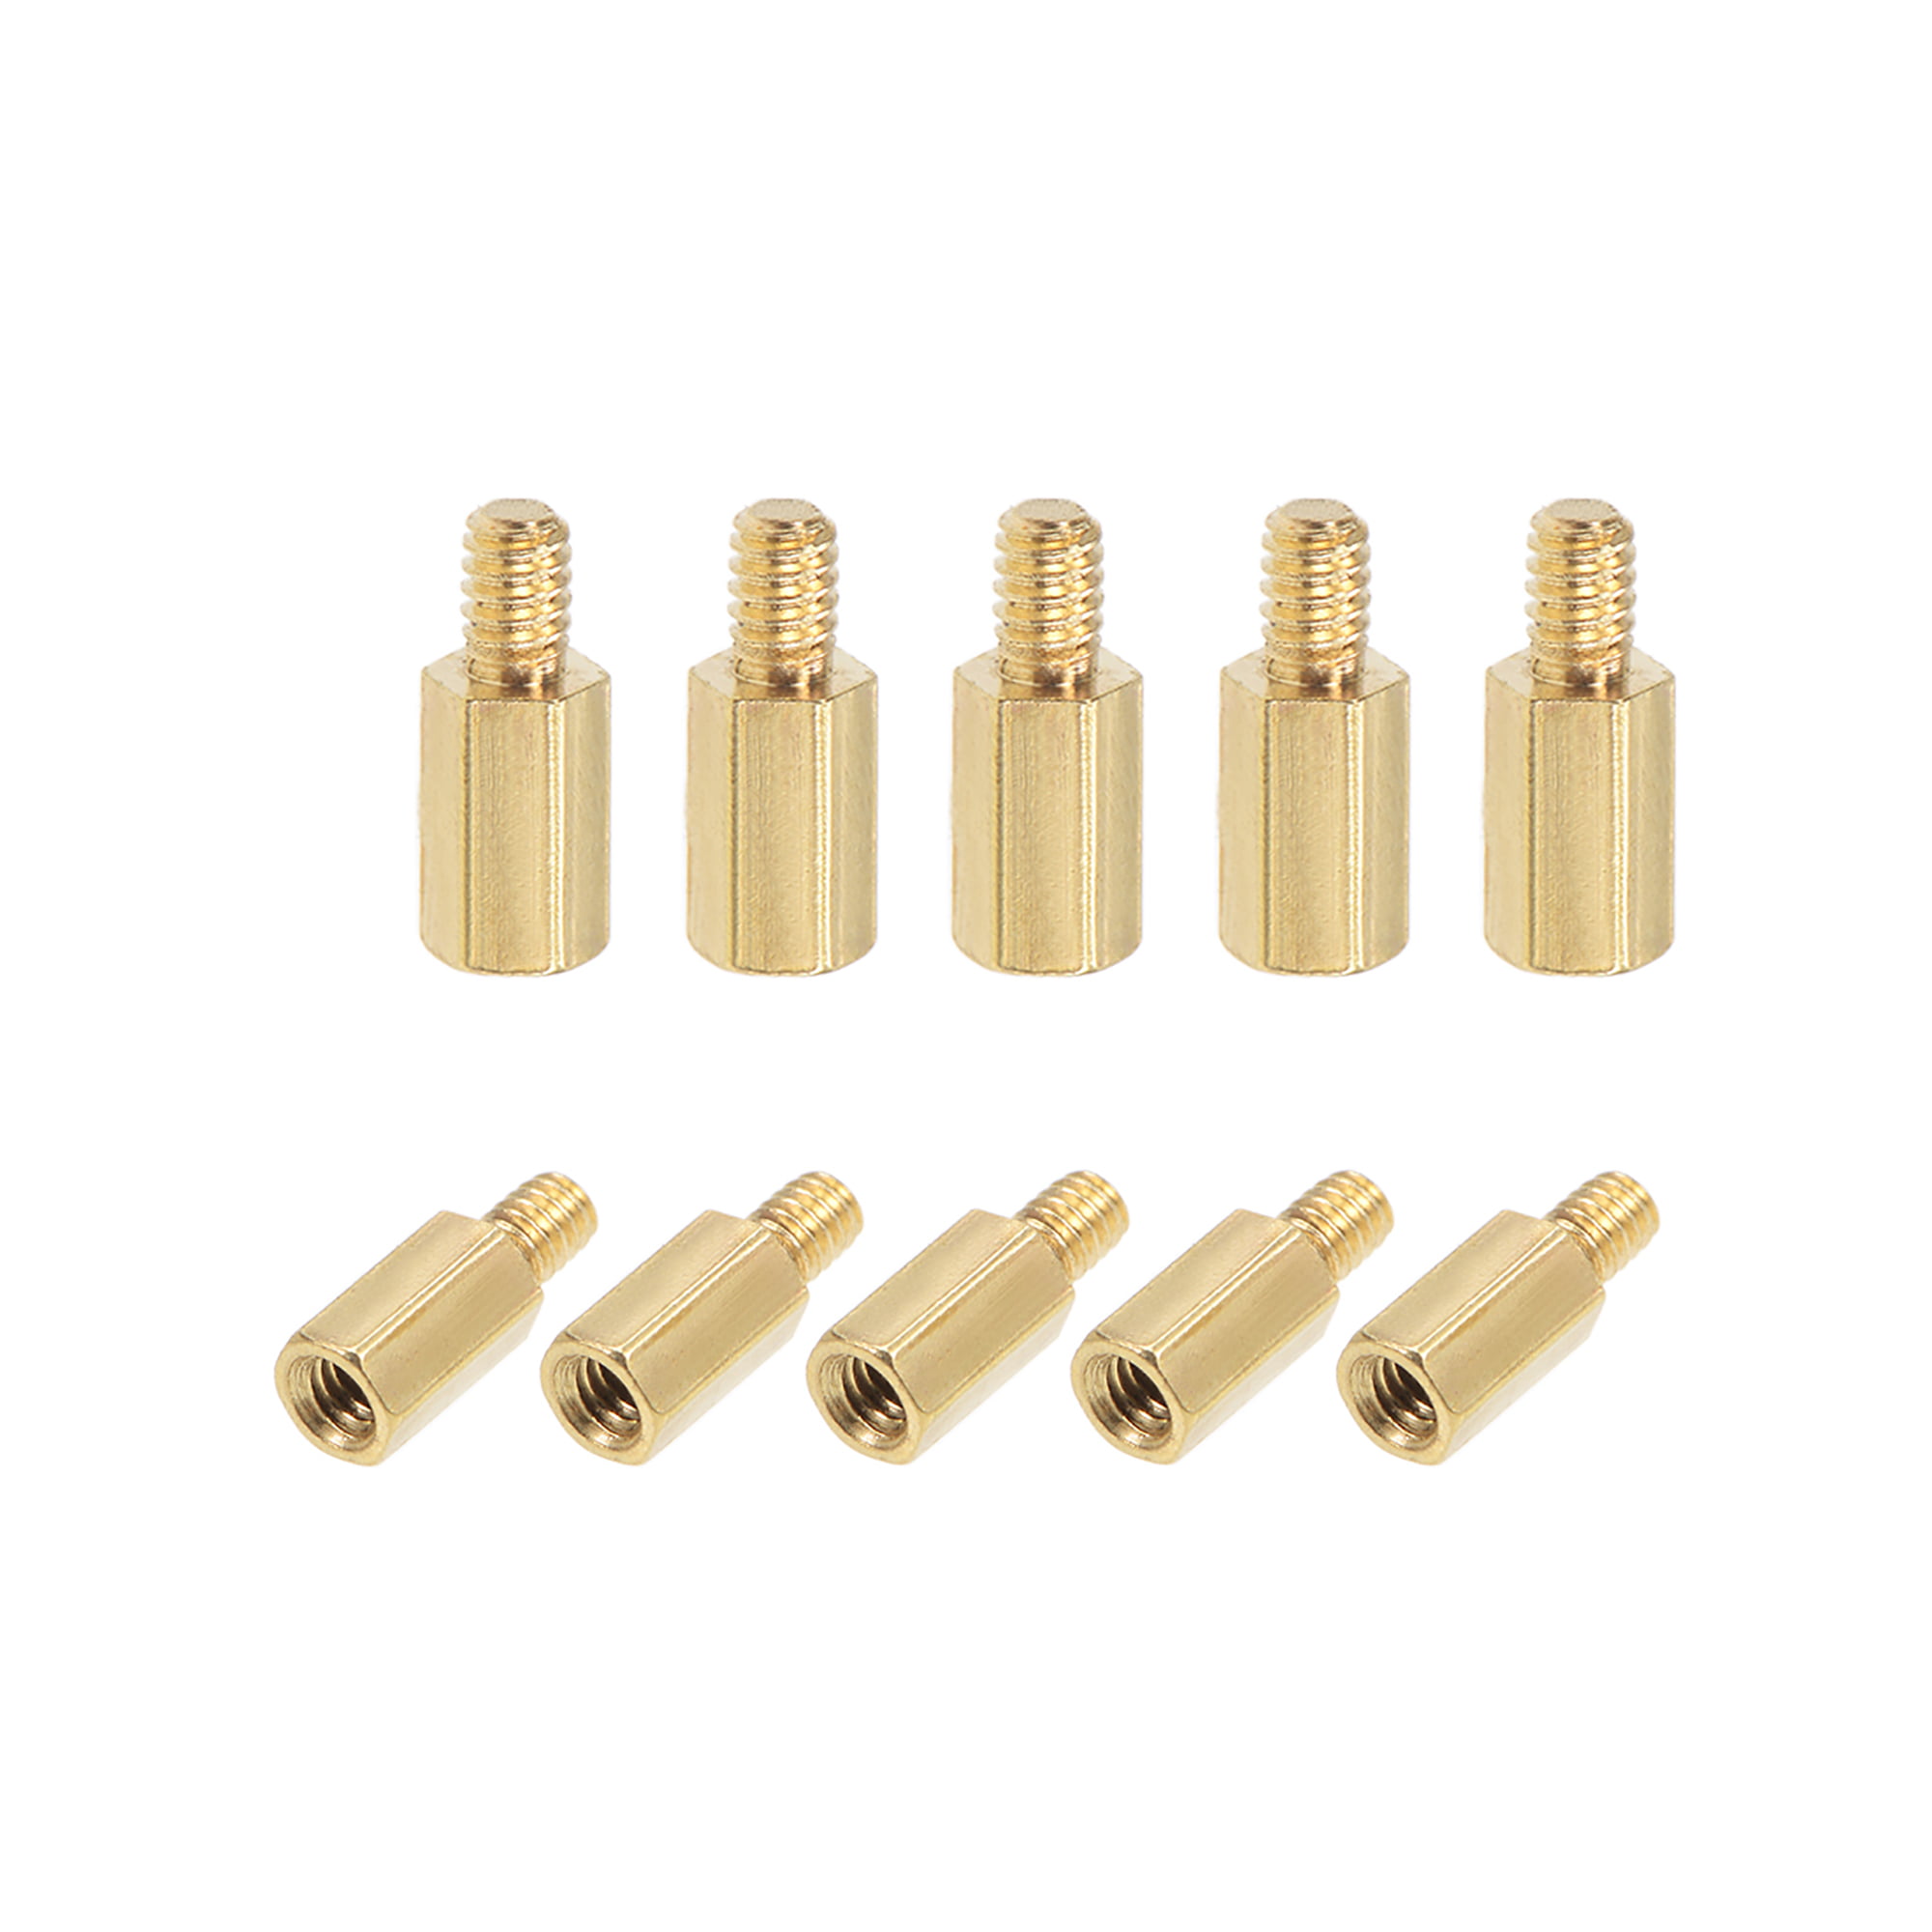 5 mm Male to Female Hex Brass Spacer Standoff 20pcs M2.5 x 5 mm